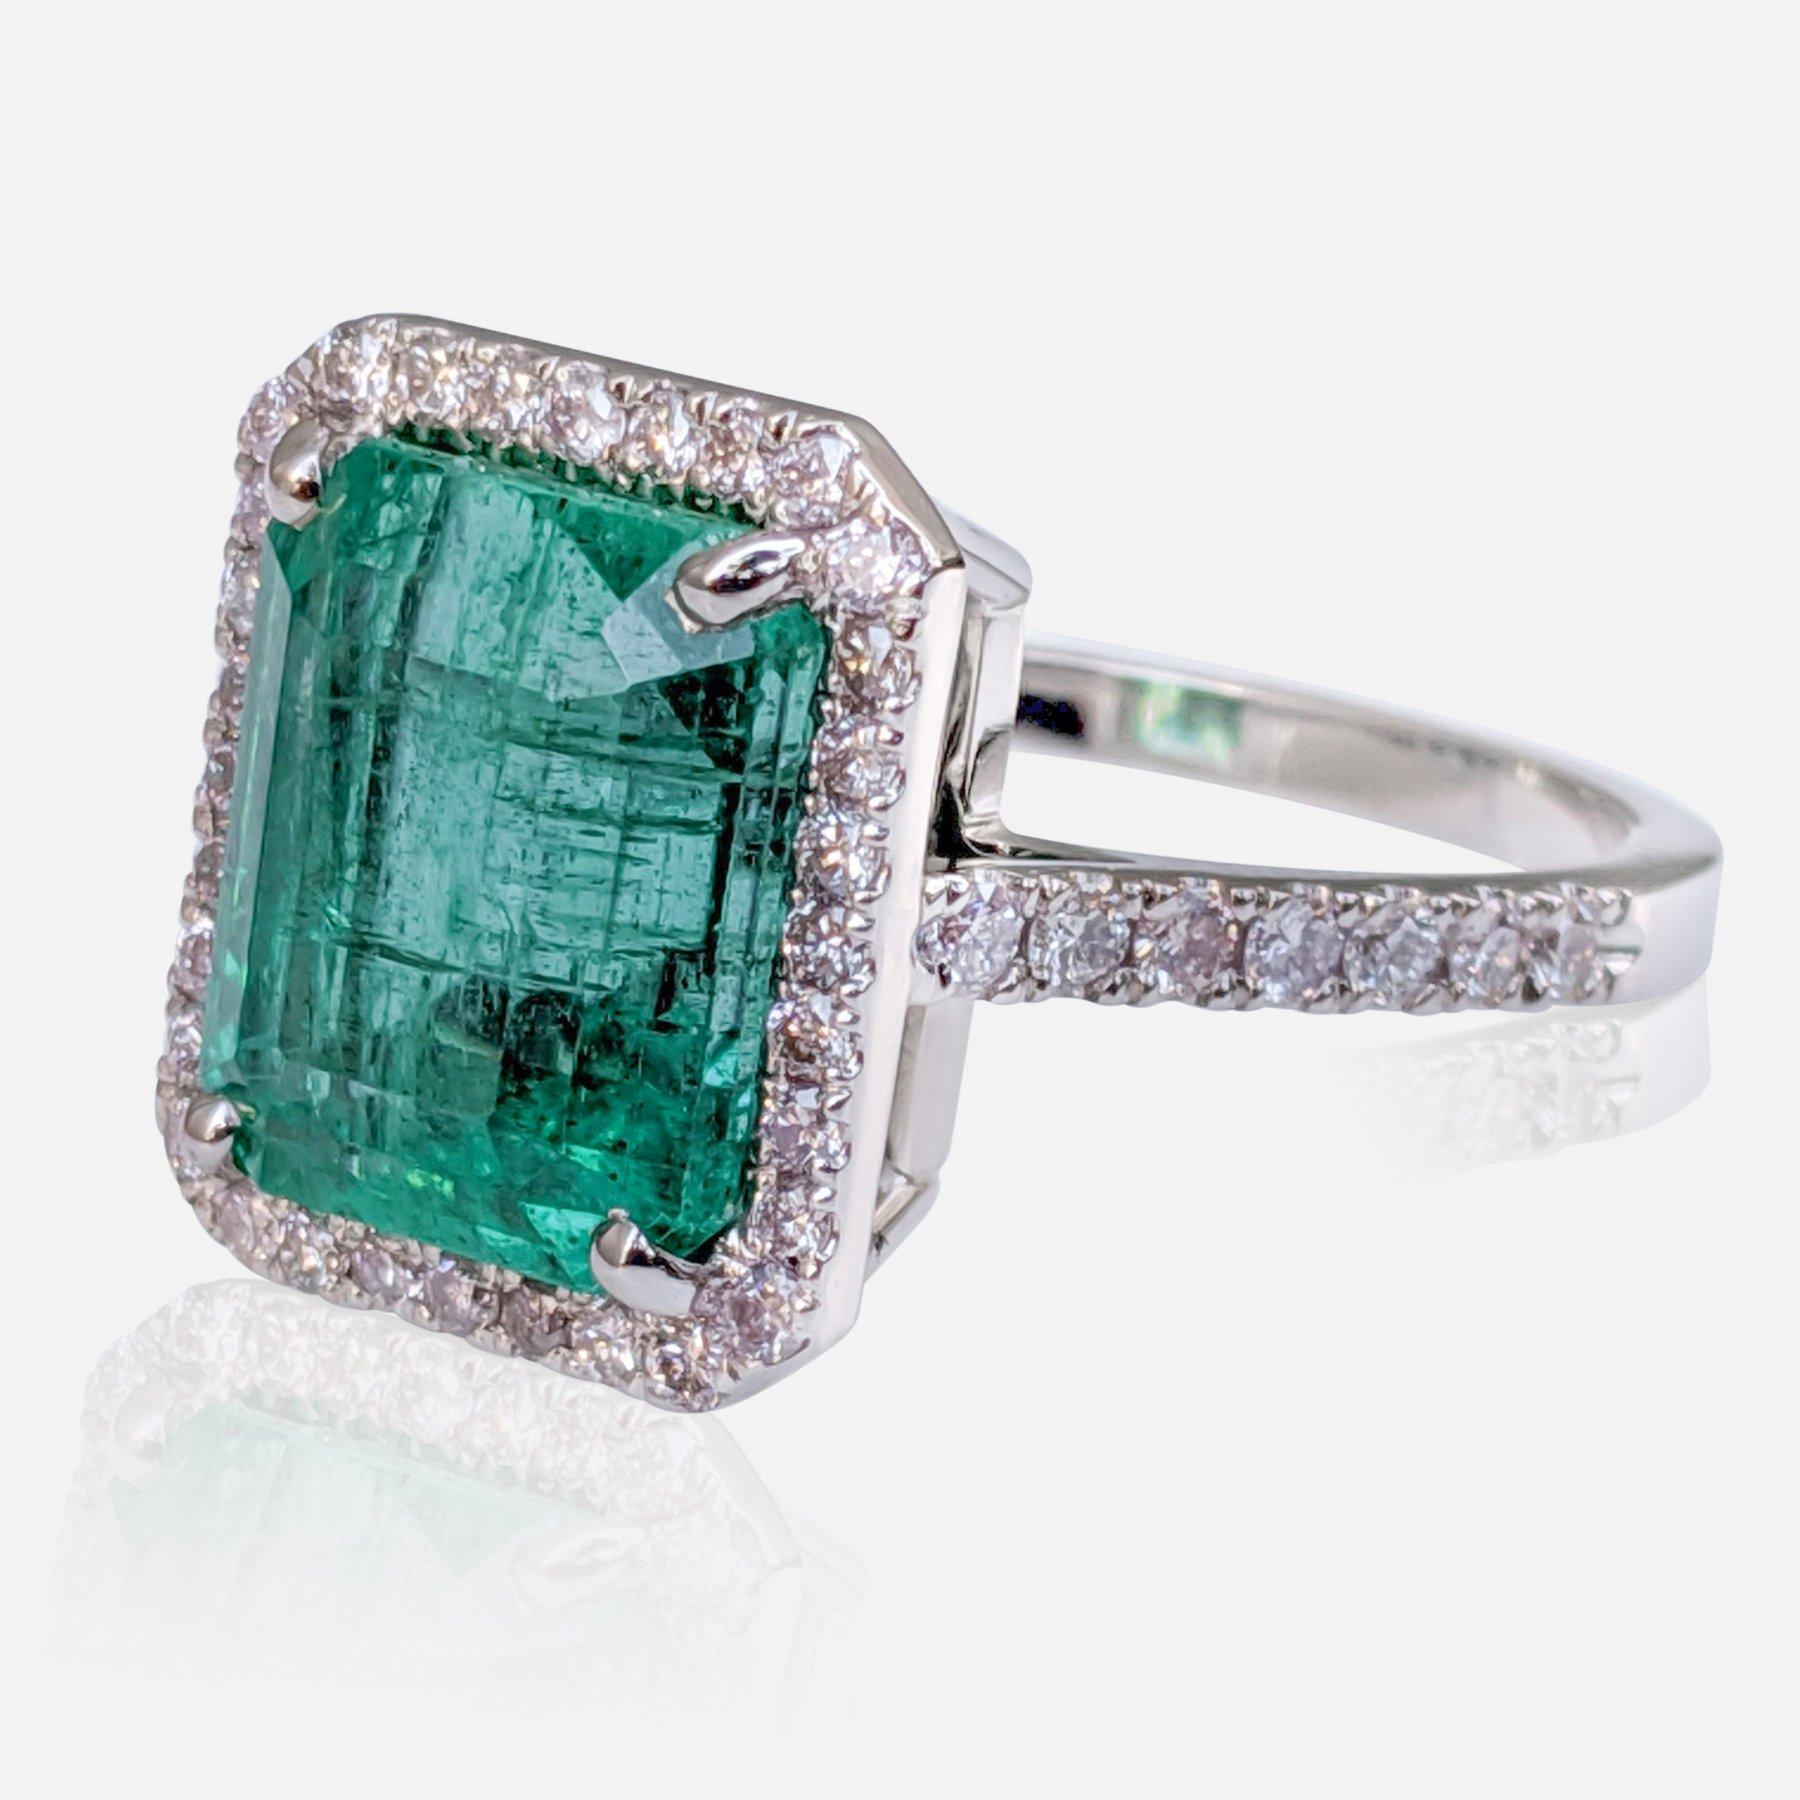 Emerald Cut NO RESERVE!  6.48 Carat Emerald & 0.62Ct Pink Diamonds - 18K White Gold Ring For Sale